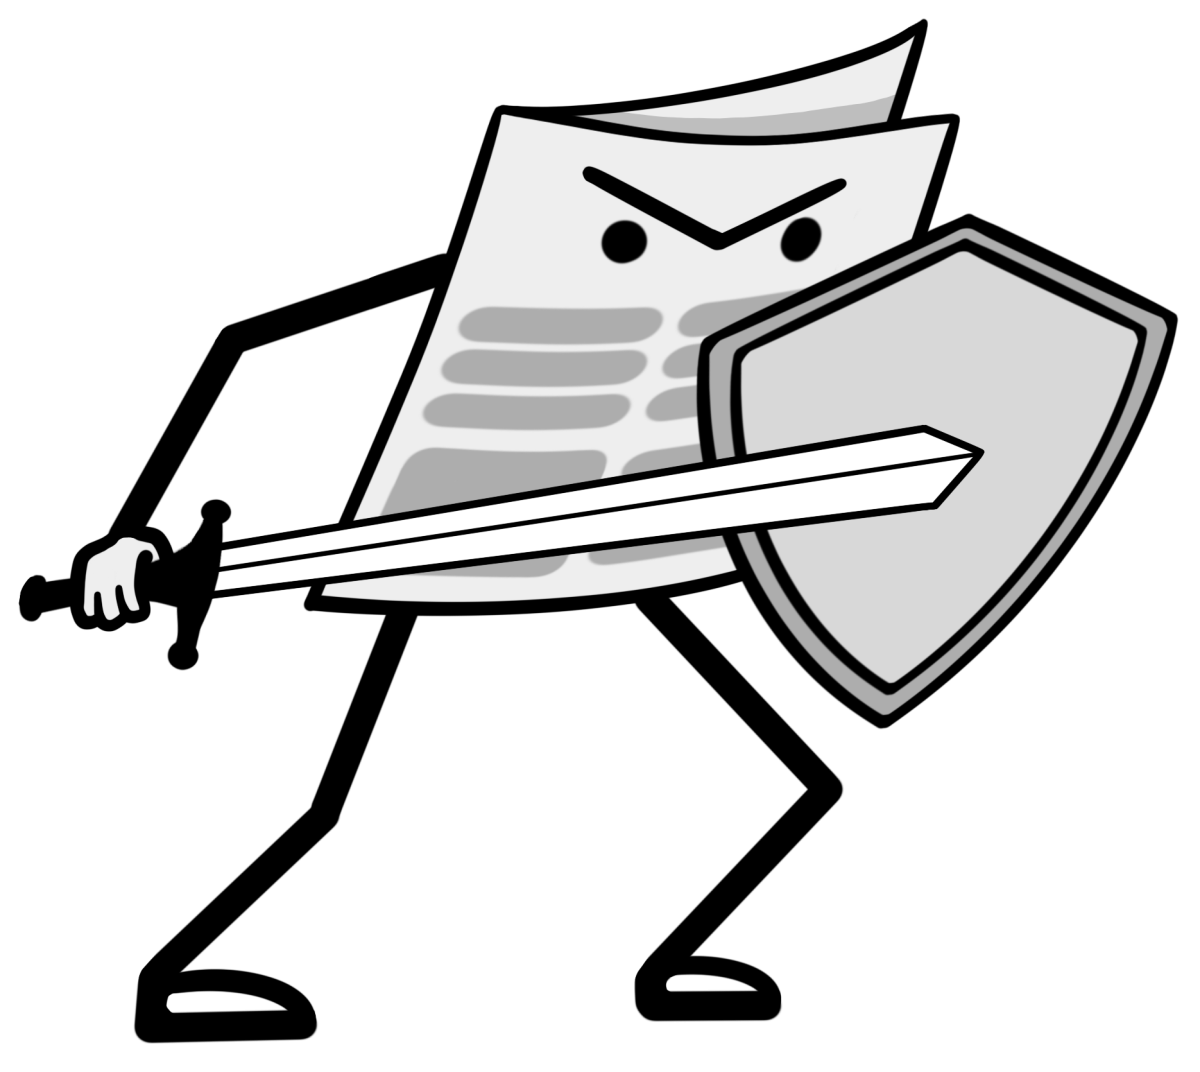 Illustration+of+a+newspaper+holding+a+sword+and+shield.